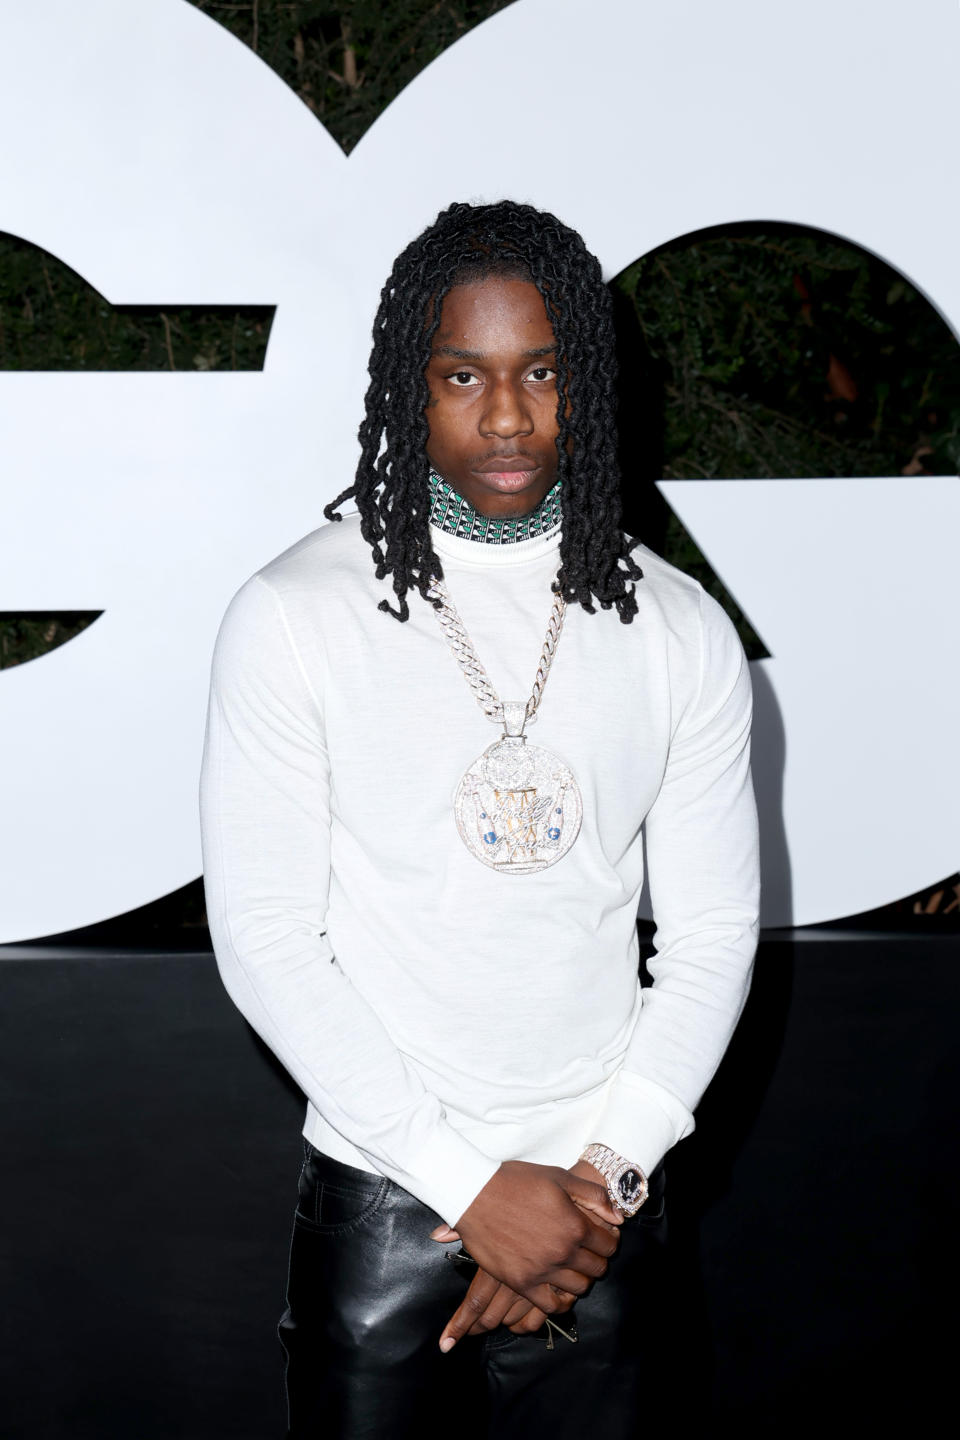 WEST HOLLYWOOD, CALIFORNIA – NOVEMBER 17: Polo G attends the GQ Men of the Year Party 2022 at The West Hollywood EDITION on November 17, 2022 in West Hollywood, California. (Photo by Phillip Faraone/Getty Images for GQ)